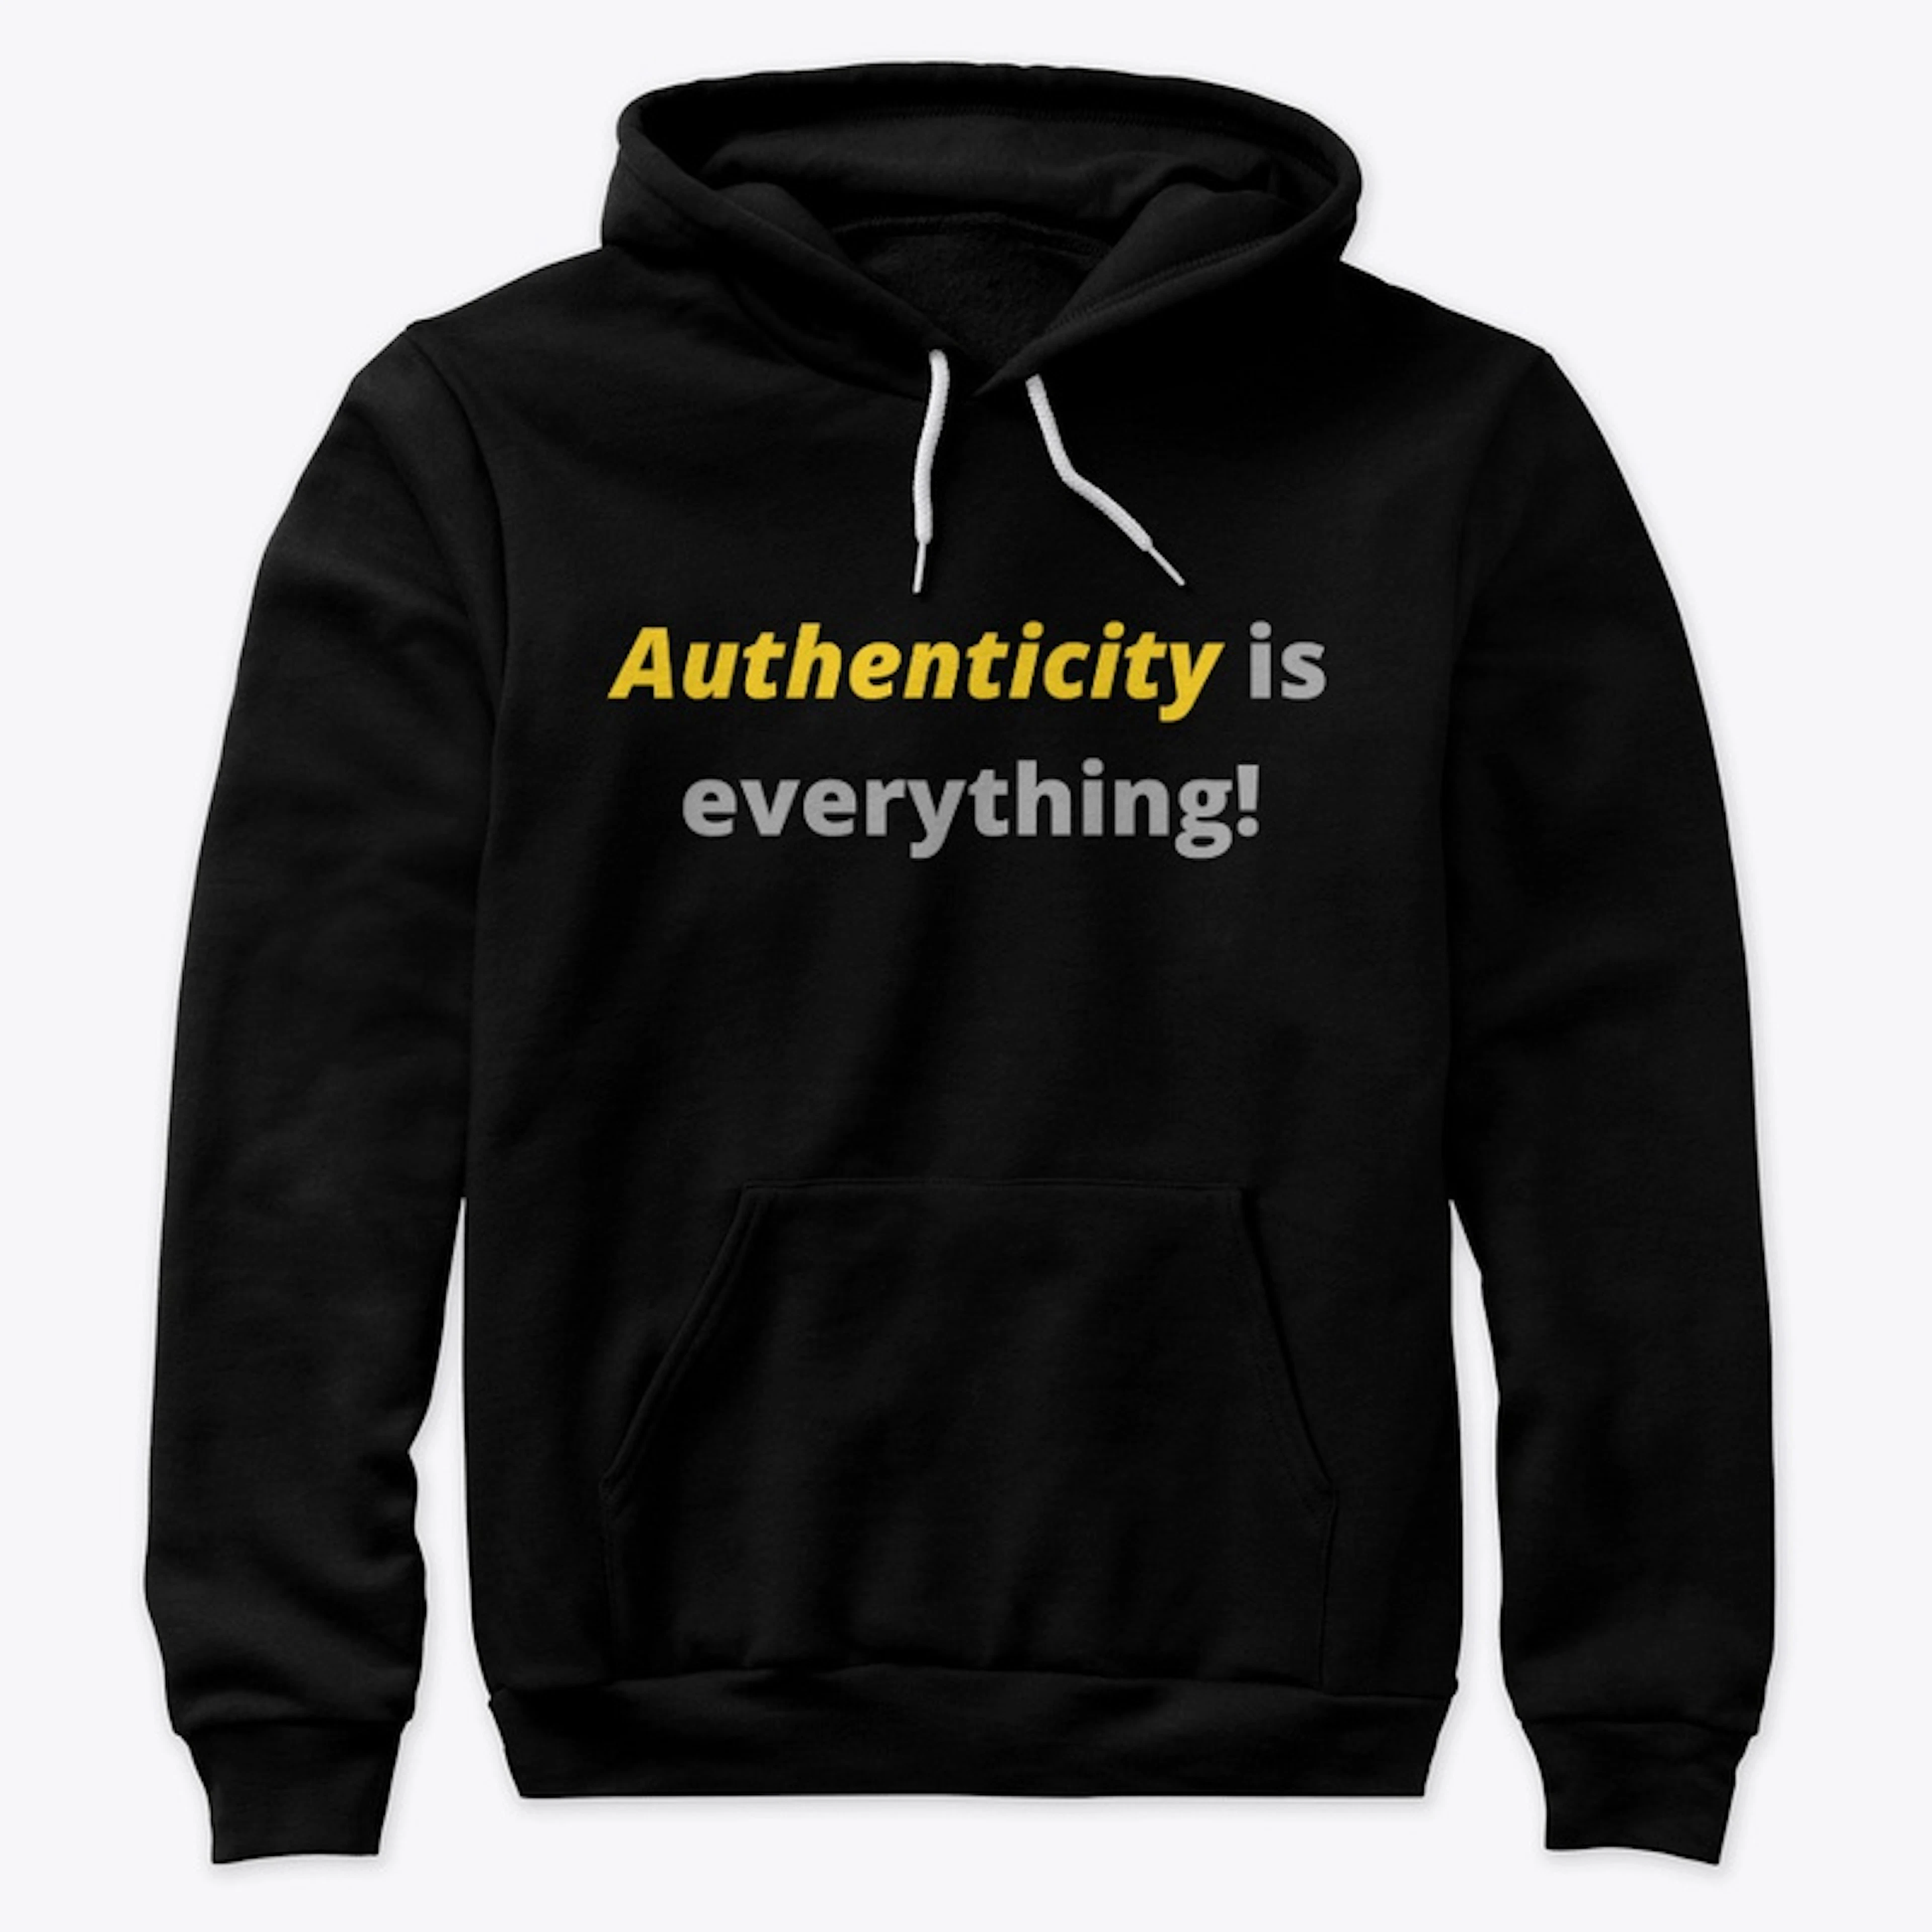 Authenticity is everything!